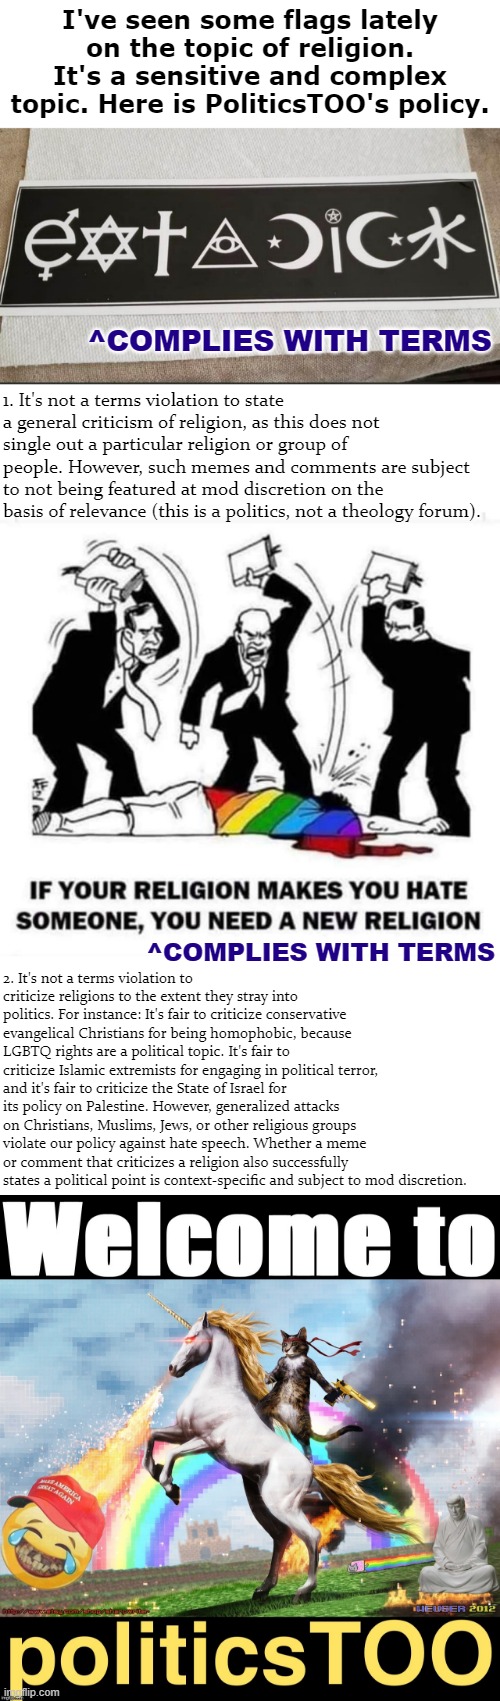 I've seen some flags lately on the topic of religion. It's a sensitive and complex topic. Here is PoliticsTOO's policy. ^COMPLIES WITH TERMS; 1. It's not a terms violation to state a general criticism of religion, as this does not single out a particular religion or group of people. However, such memes and comments are subject to not being featured at mod discretion on the basis of relevance (this is a politics, not a theology forum). 2. It's not a terms violation to criticize religions to the extent they stray into politics. For instance: It's fair to criticize conservative evangelical Christians for being homophobic, because LGBTQ rights are a political topic. It's fair to criticize Islamic extremists for engaging in political terror, and it's fair to criticize the State of Israel for its policy on Palestine. However, generalized attacks on Christians, Muslims, Jews, or other religious groups violate our policy against hate speech. Whether a meme or comment that criticizes a religion also successfully states a political point is context-specific and subject to mod discretion. ^COMPLIES WITH TERMS | image tagged in eat a dick religions,if your religion makes you hate someone,welcome to politicstoo | made w/ Imgflip meme maker